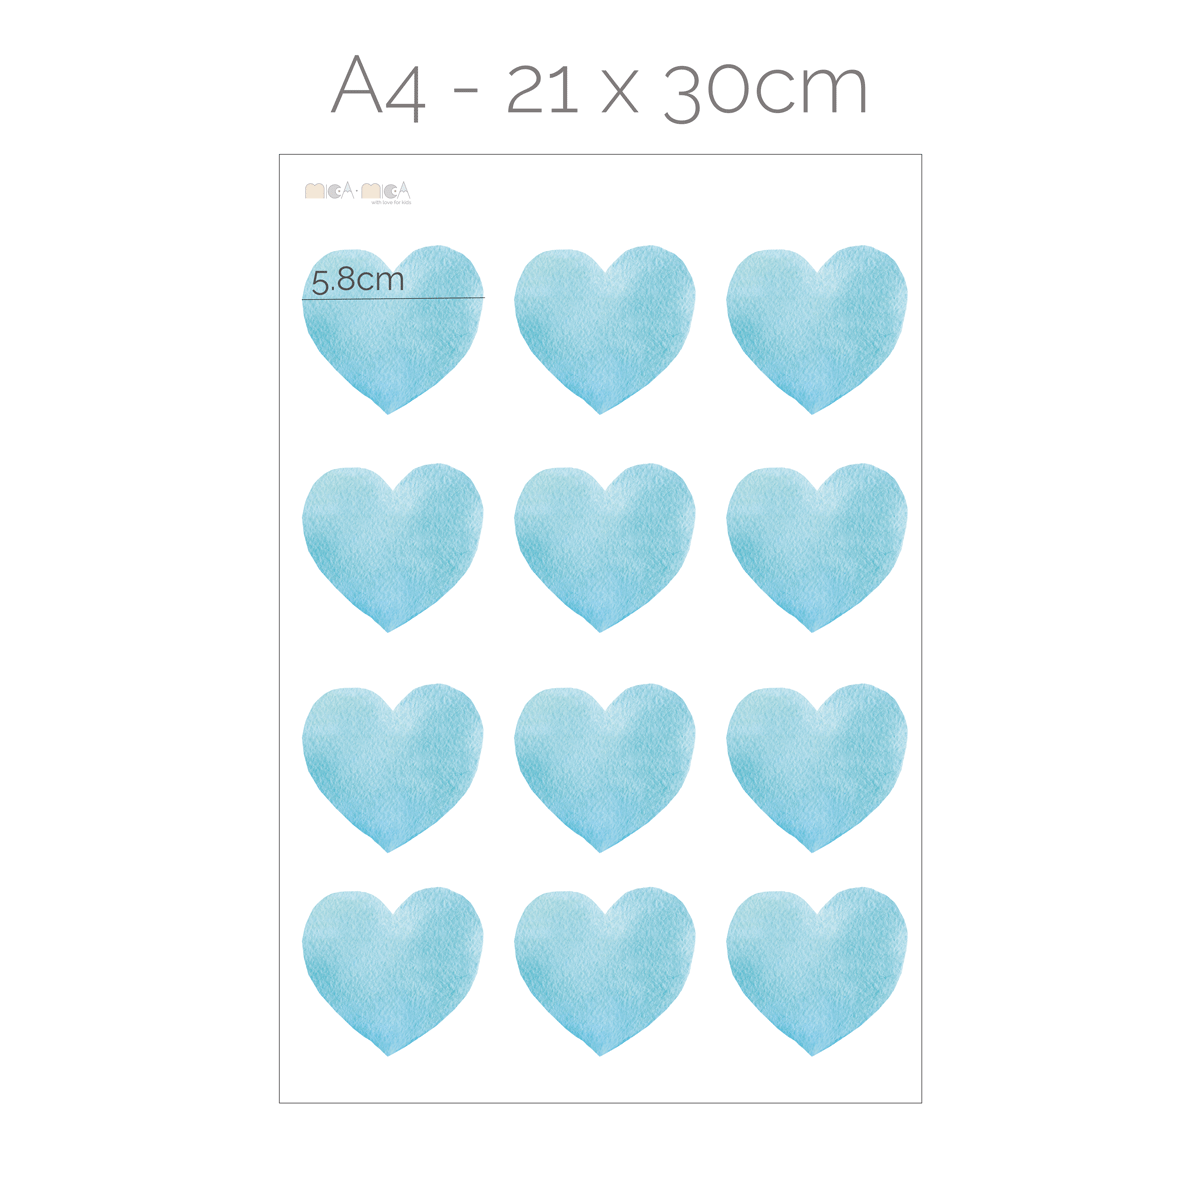 Hearts wall stickers - Blue watercolour hearts